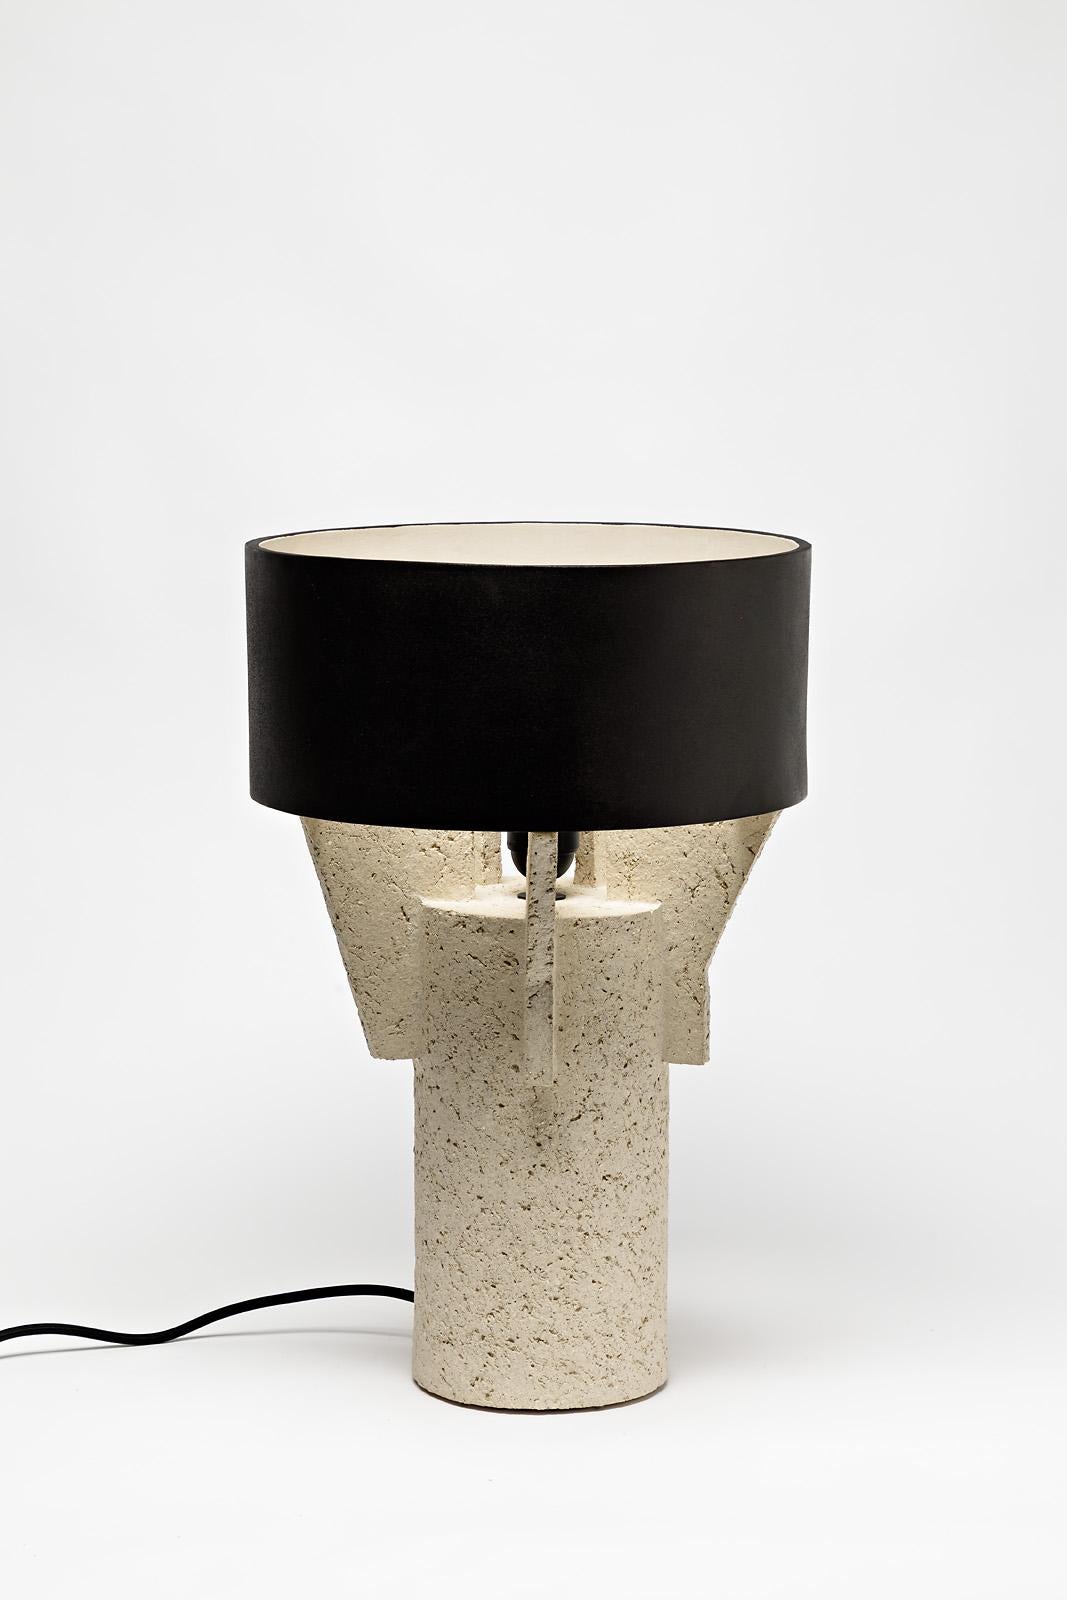 A ceramic table lamp by Denis Castaing with brown glaze decoration.
The base and the lamp shade are in ceramic.
Sold with an European electrical system.
Perfect original conditions.
2019.
Signed under the base.